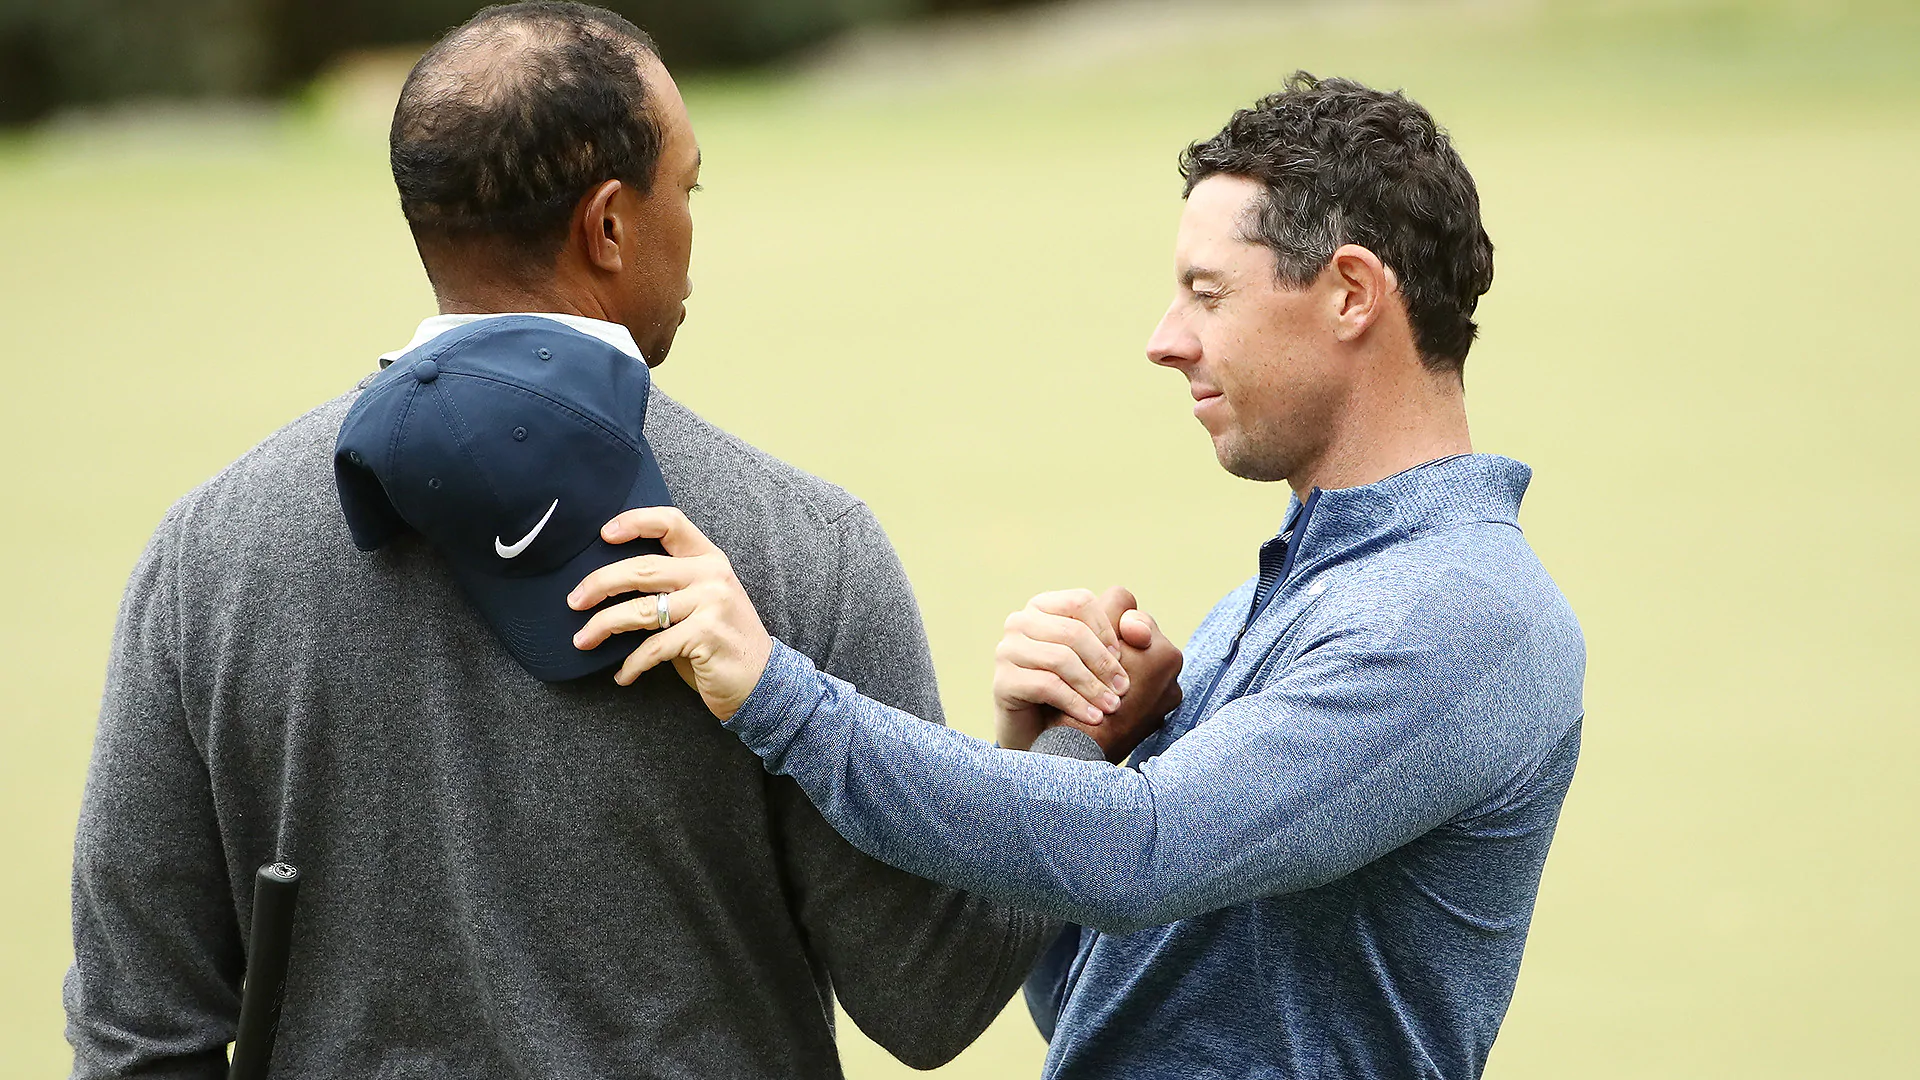 Woods advances, 2 and 1, after McIlroy melts down late